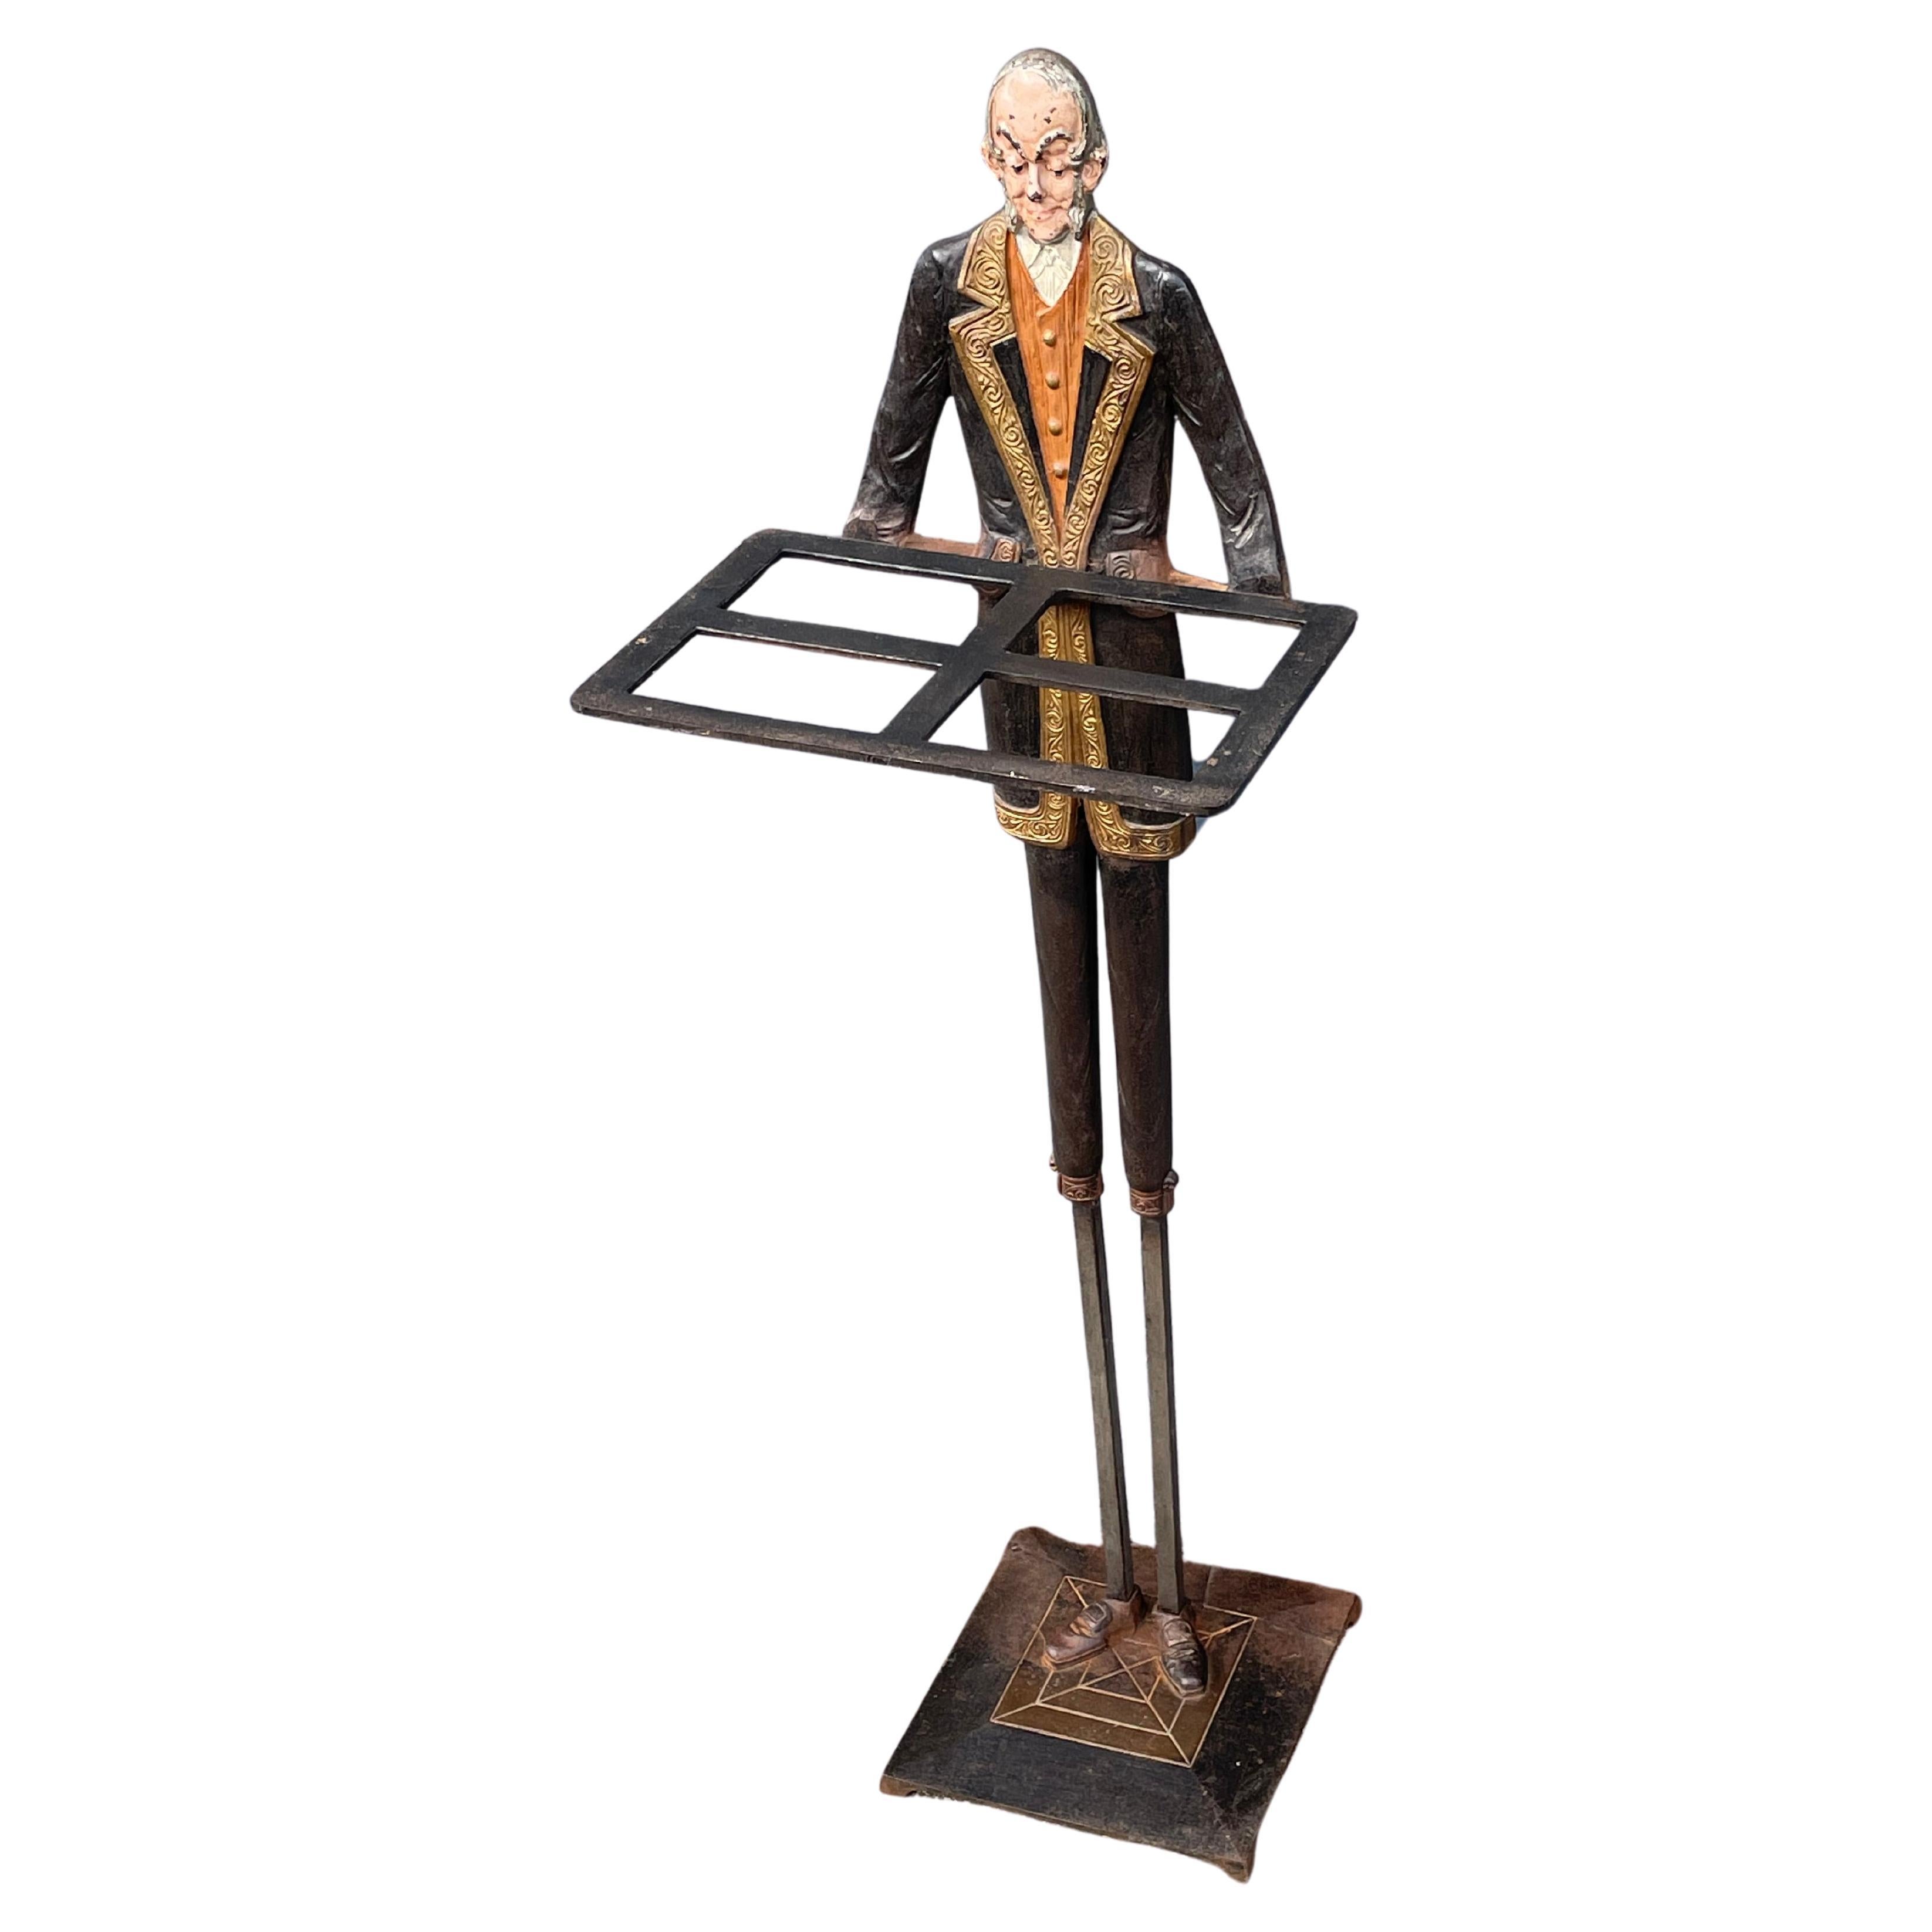 Art Deco Era, Cast Iron Tray or Umbrella Stand w. Painted Servant Sculpture 1920 For Sale